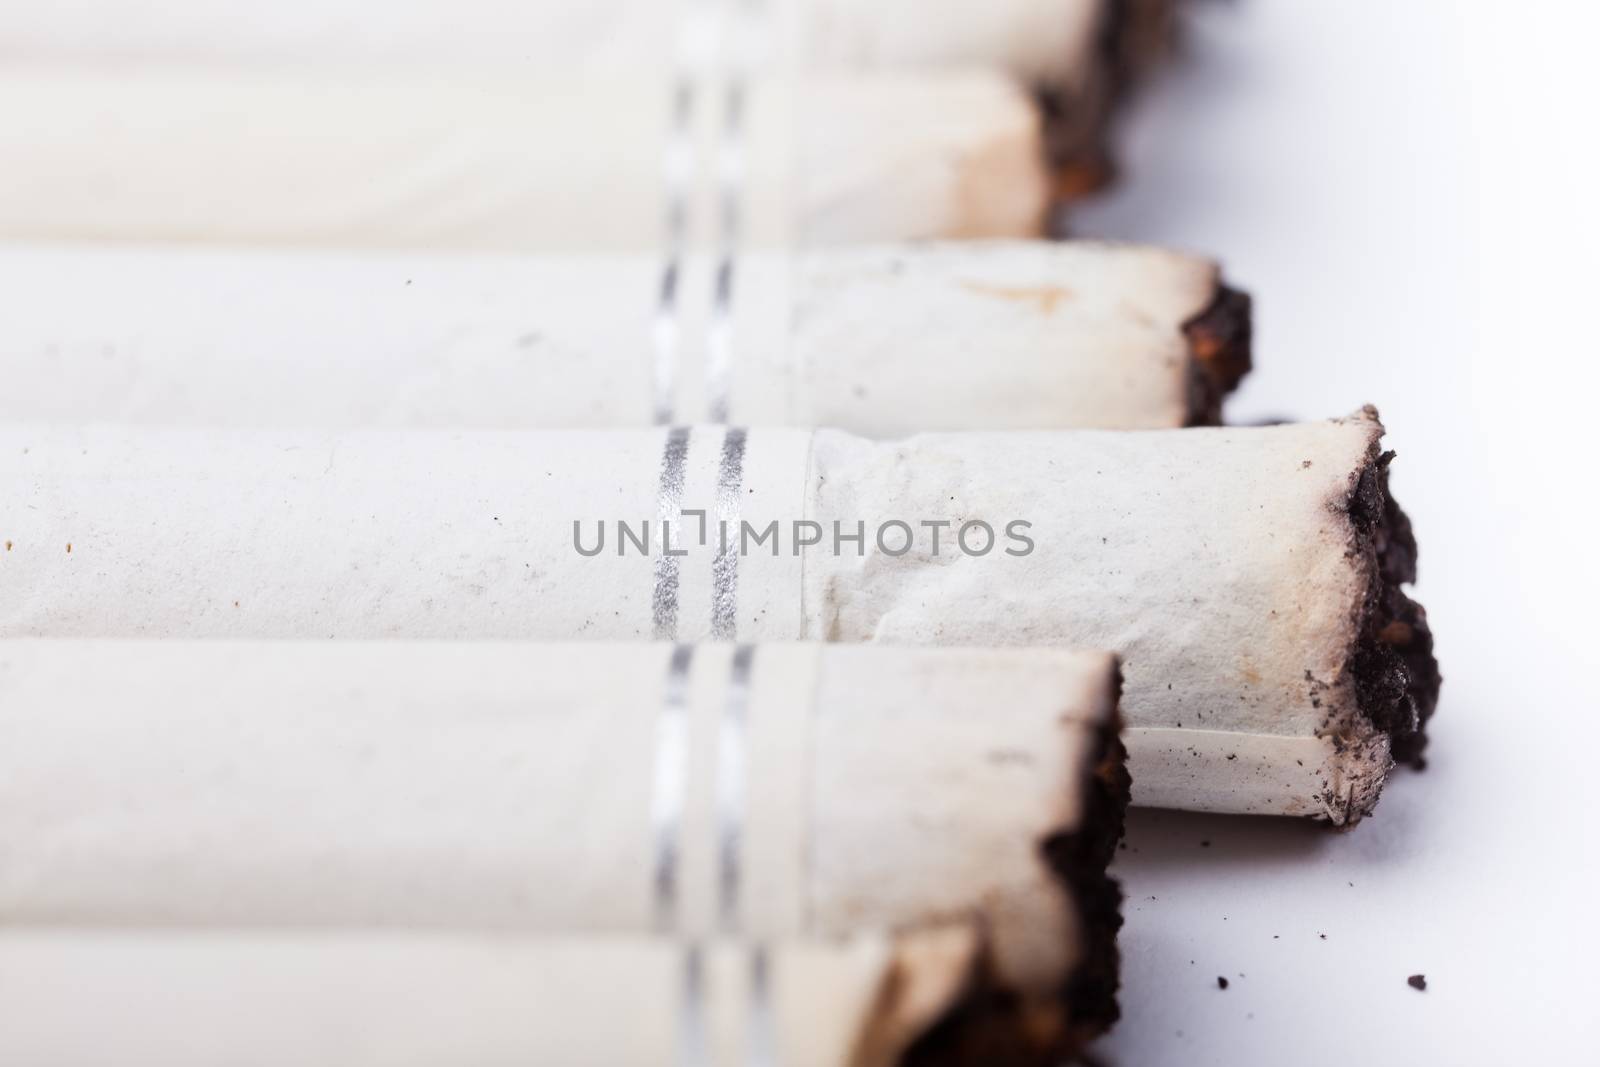 A macro shot of some cigarettes